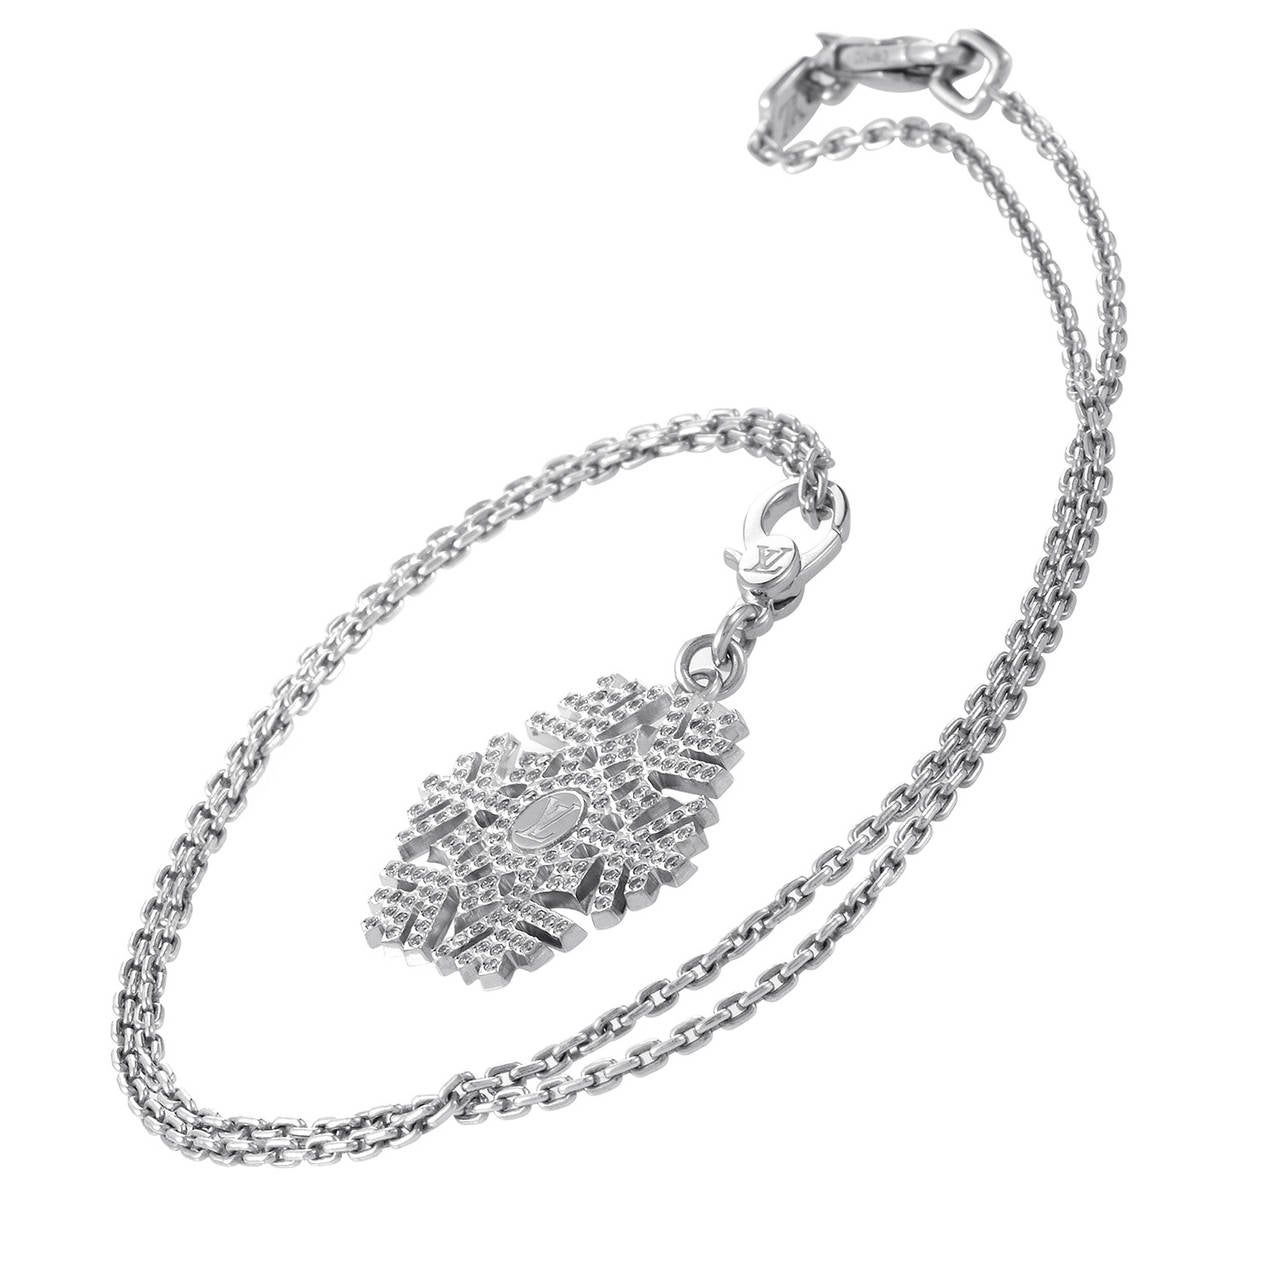 A cool design from Louis Vuitton, this pendant necklace is a real eye-catcher. The necklace is made of 18K white gold and boasts a snowflake-shaped pendant set with a diamond pave.

Approximate Dimensions: Drop of the Necklace: 9.00